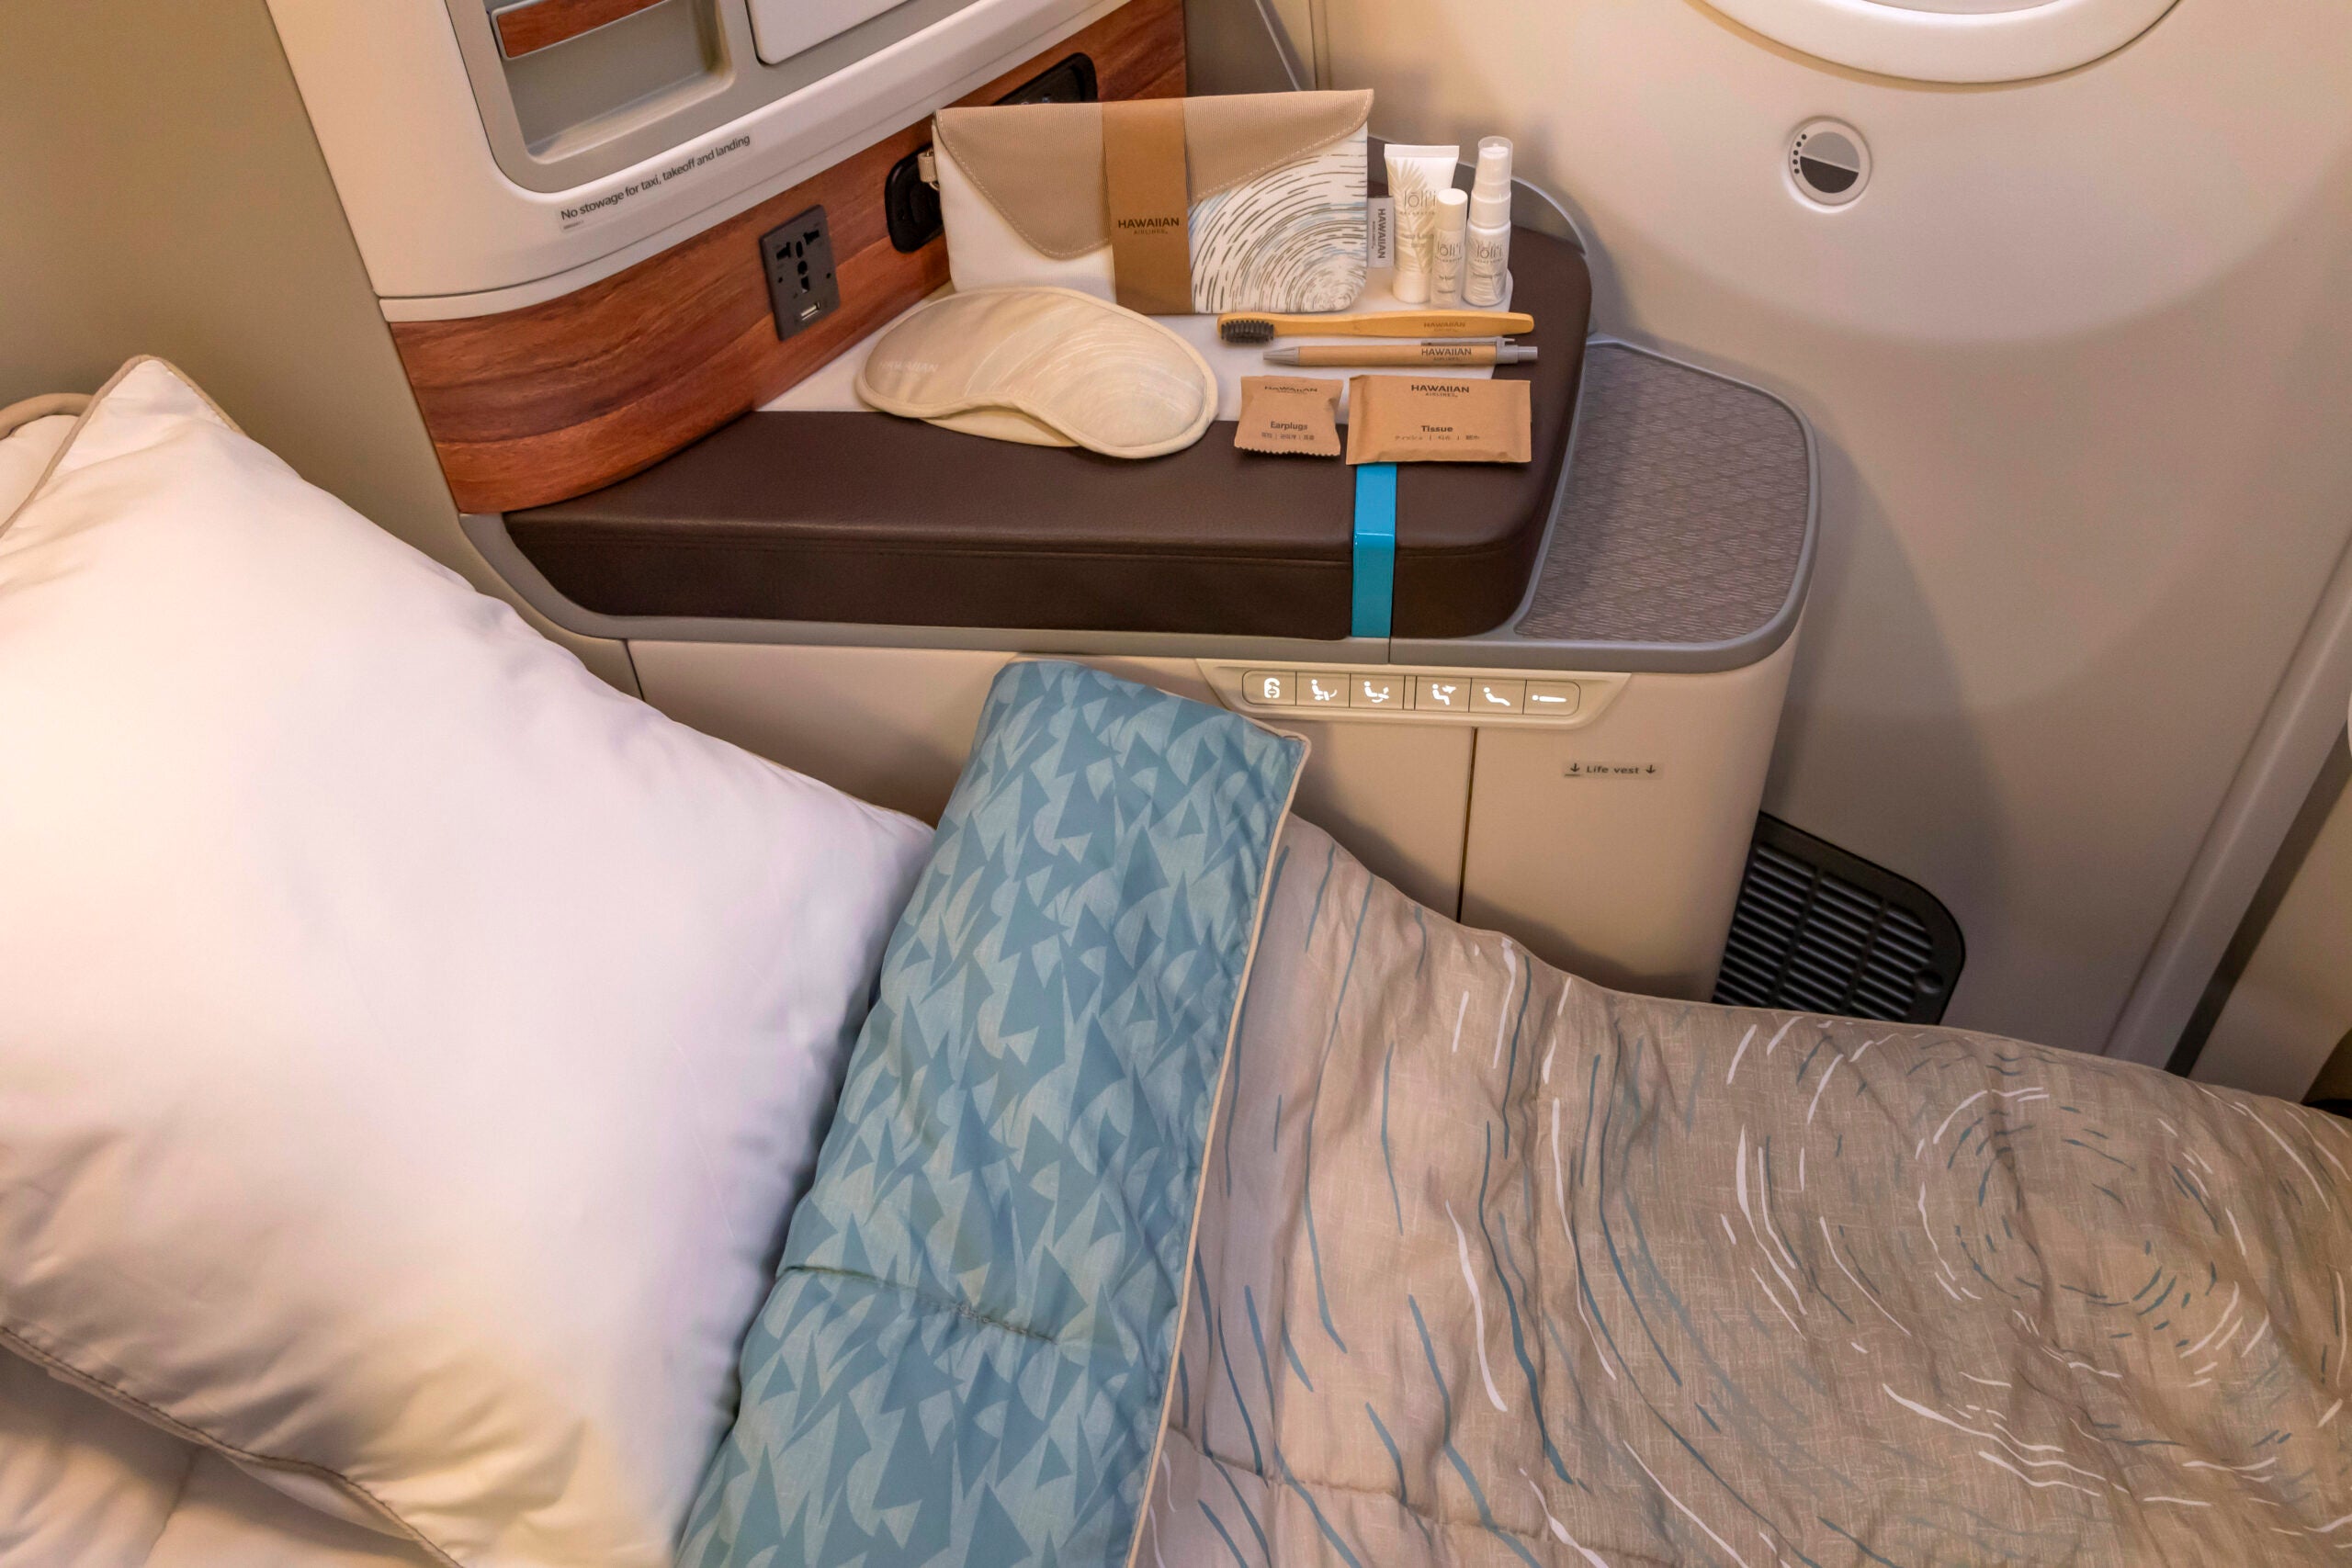 Mattress pad, blanket and pillow for business class cabins